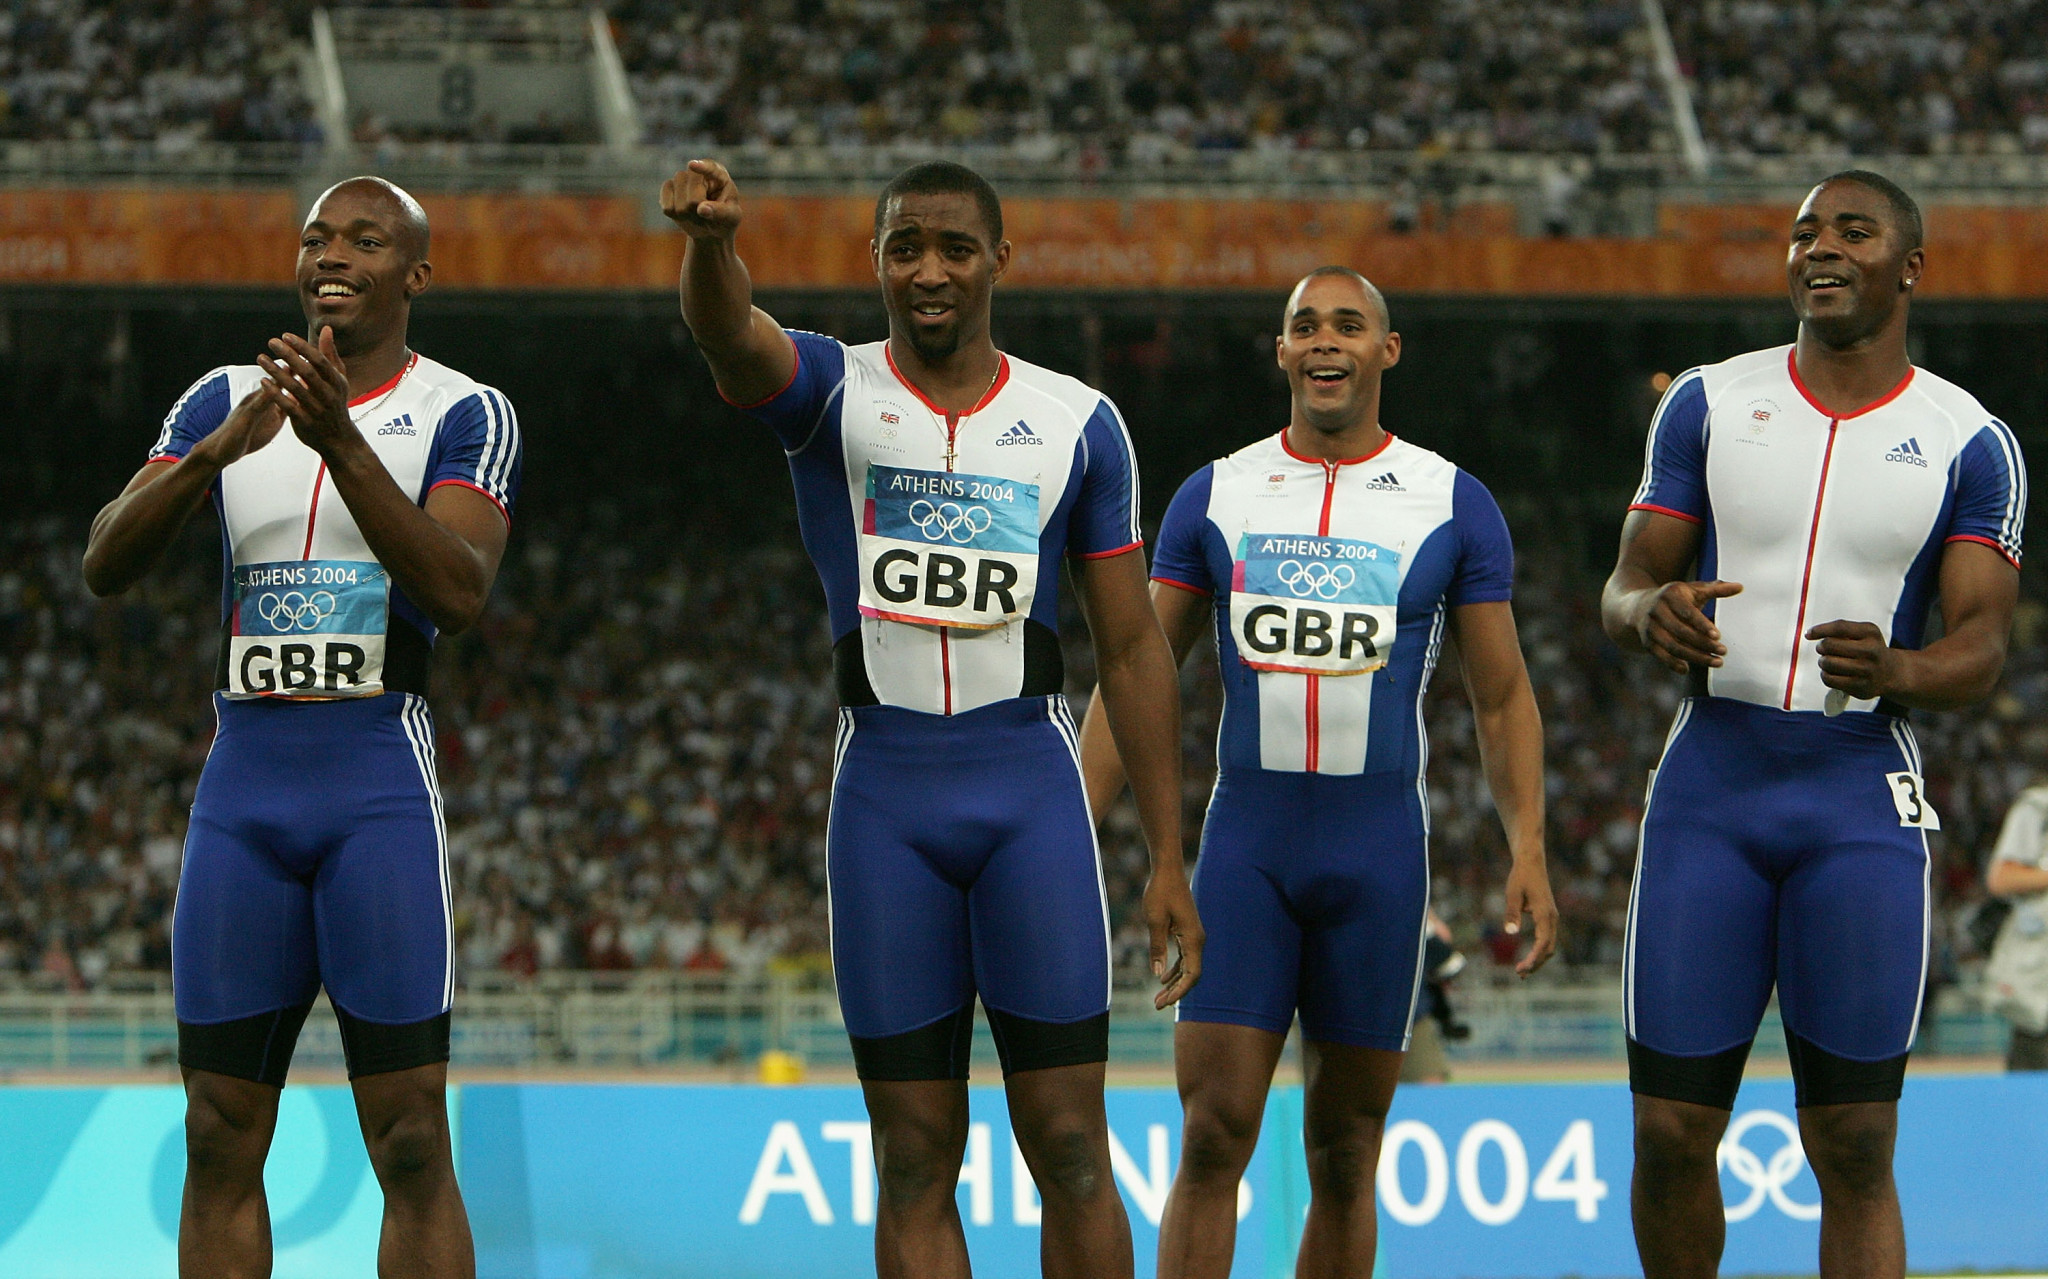 Darren Campbell was part of the Olympic 4x100m relay team at Athens 2004 that won gold ©Getty Images